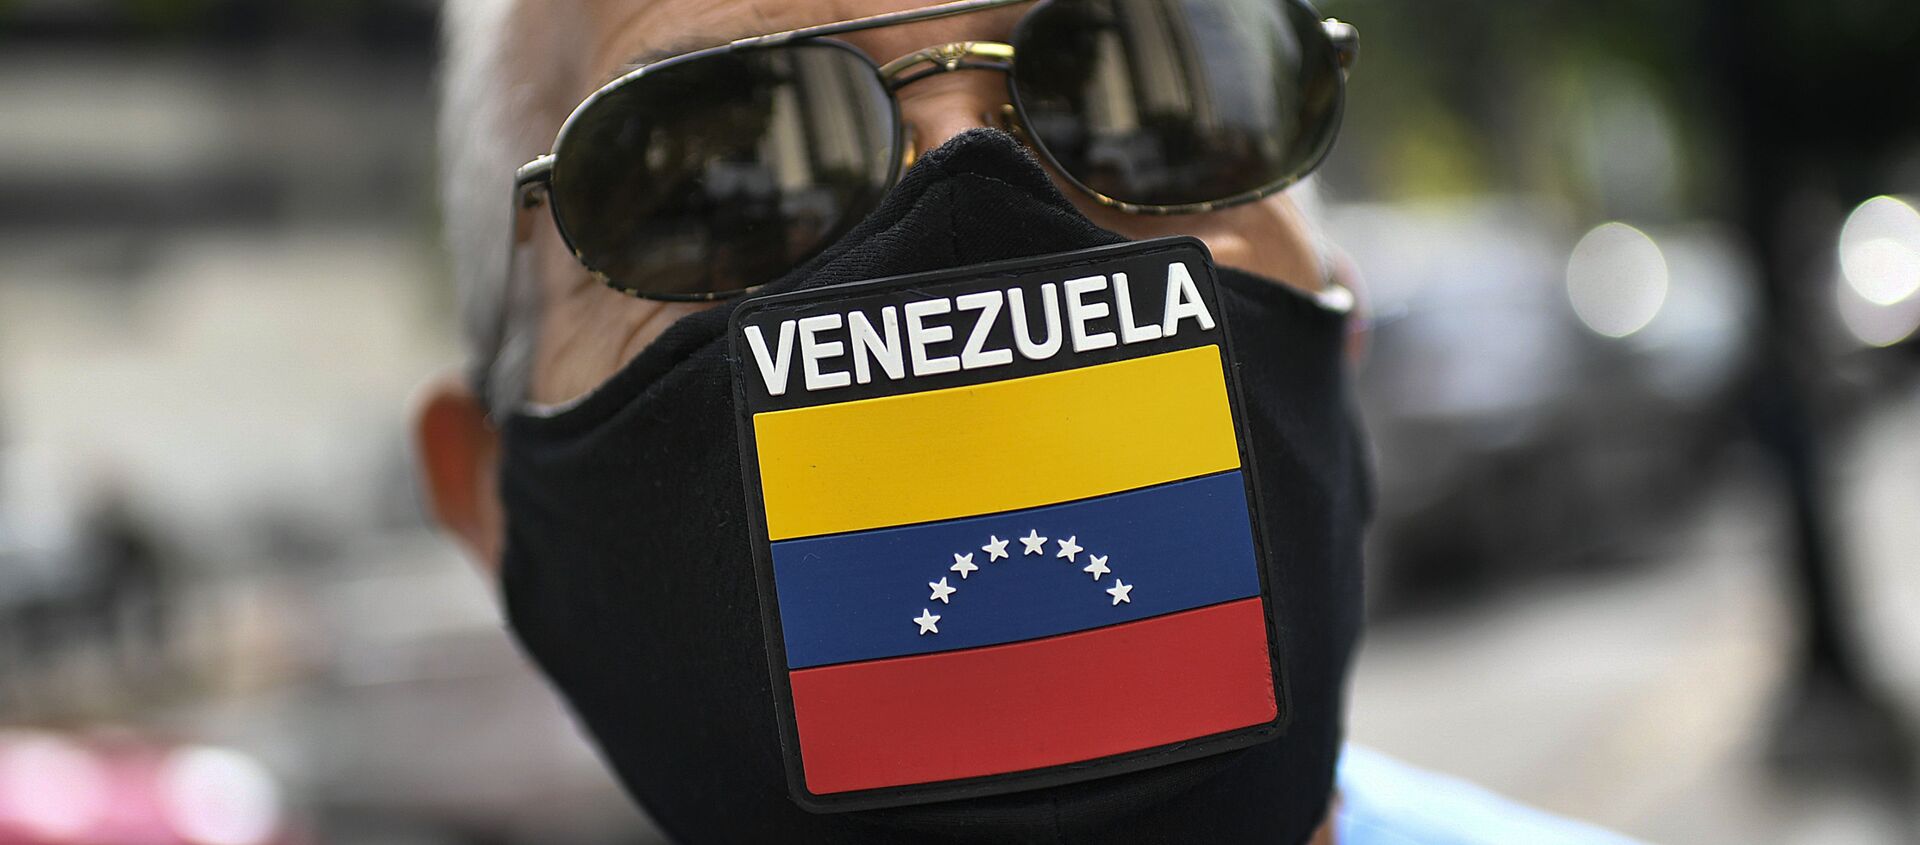 A man wears a face mask with the Venezuela flag, amid the spread of the new coronavirus, as he waits for hours to fill up his car at a state-run oil company PDVSA as station in Caracas, Venezuela, Monday, May 25, 2020 - Sputnik International, 1920, 12.03.2021